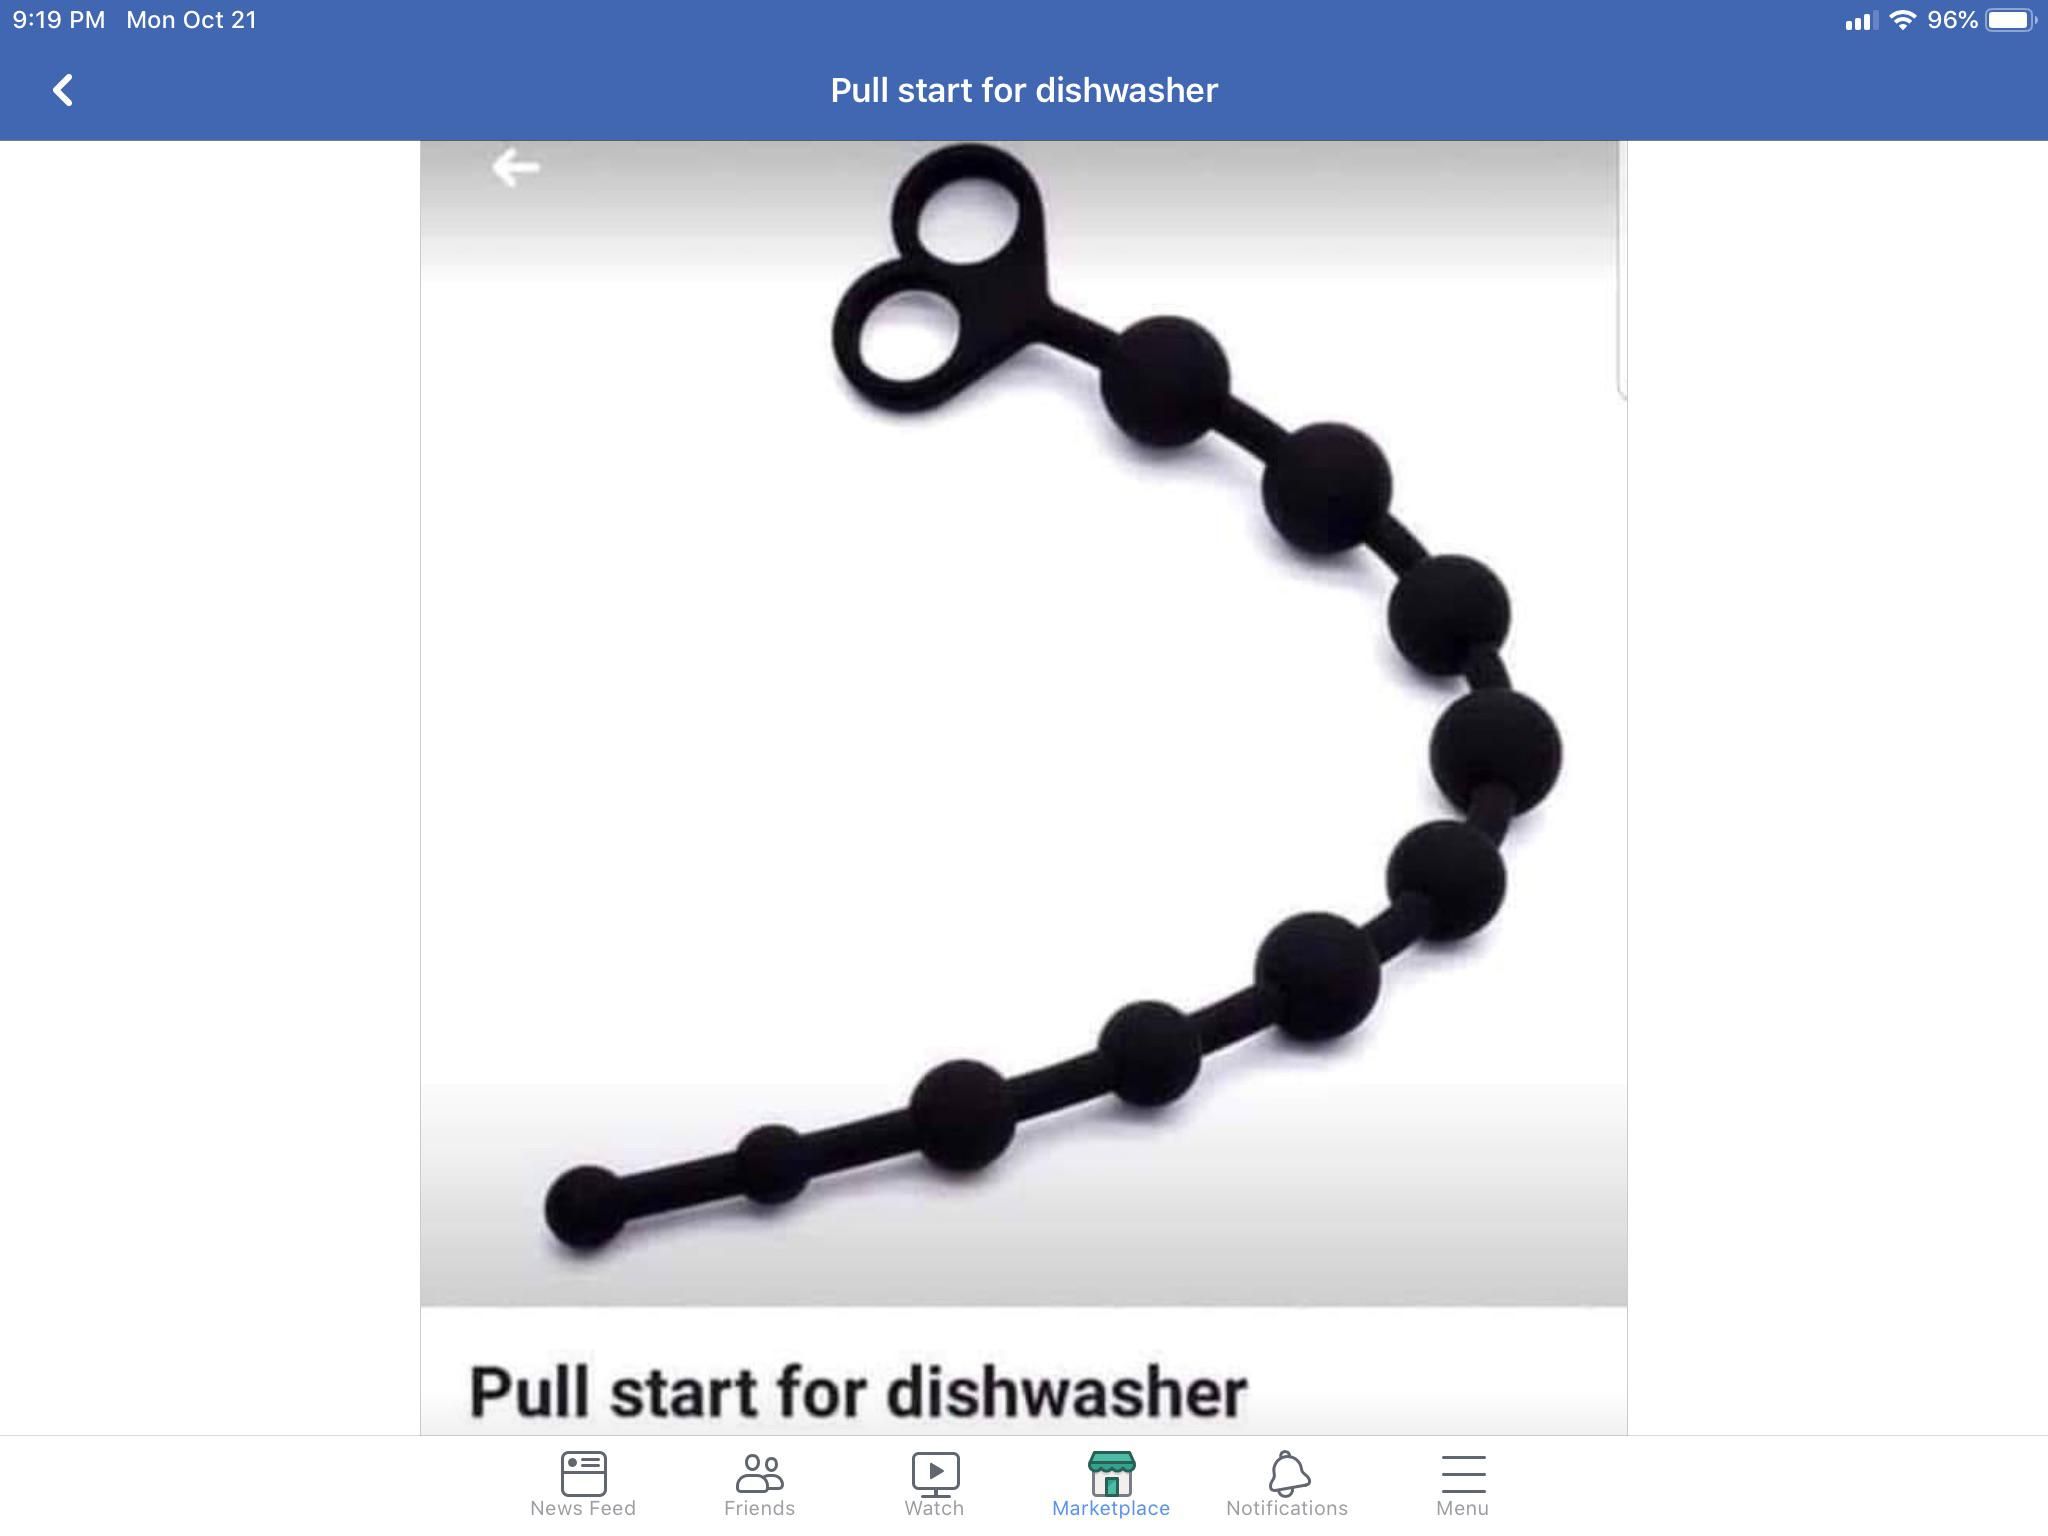 Pull start for a dishwasher. This was listed for sale on my local Facebook marketplace.